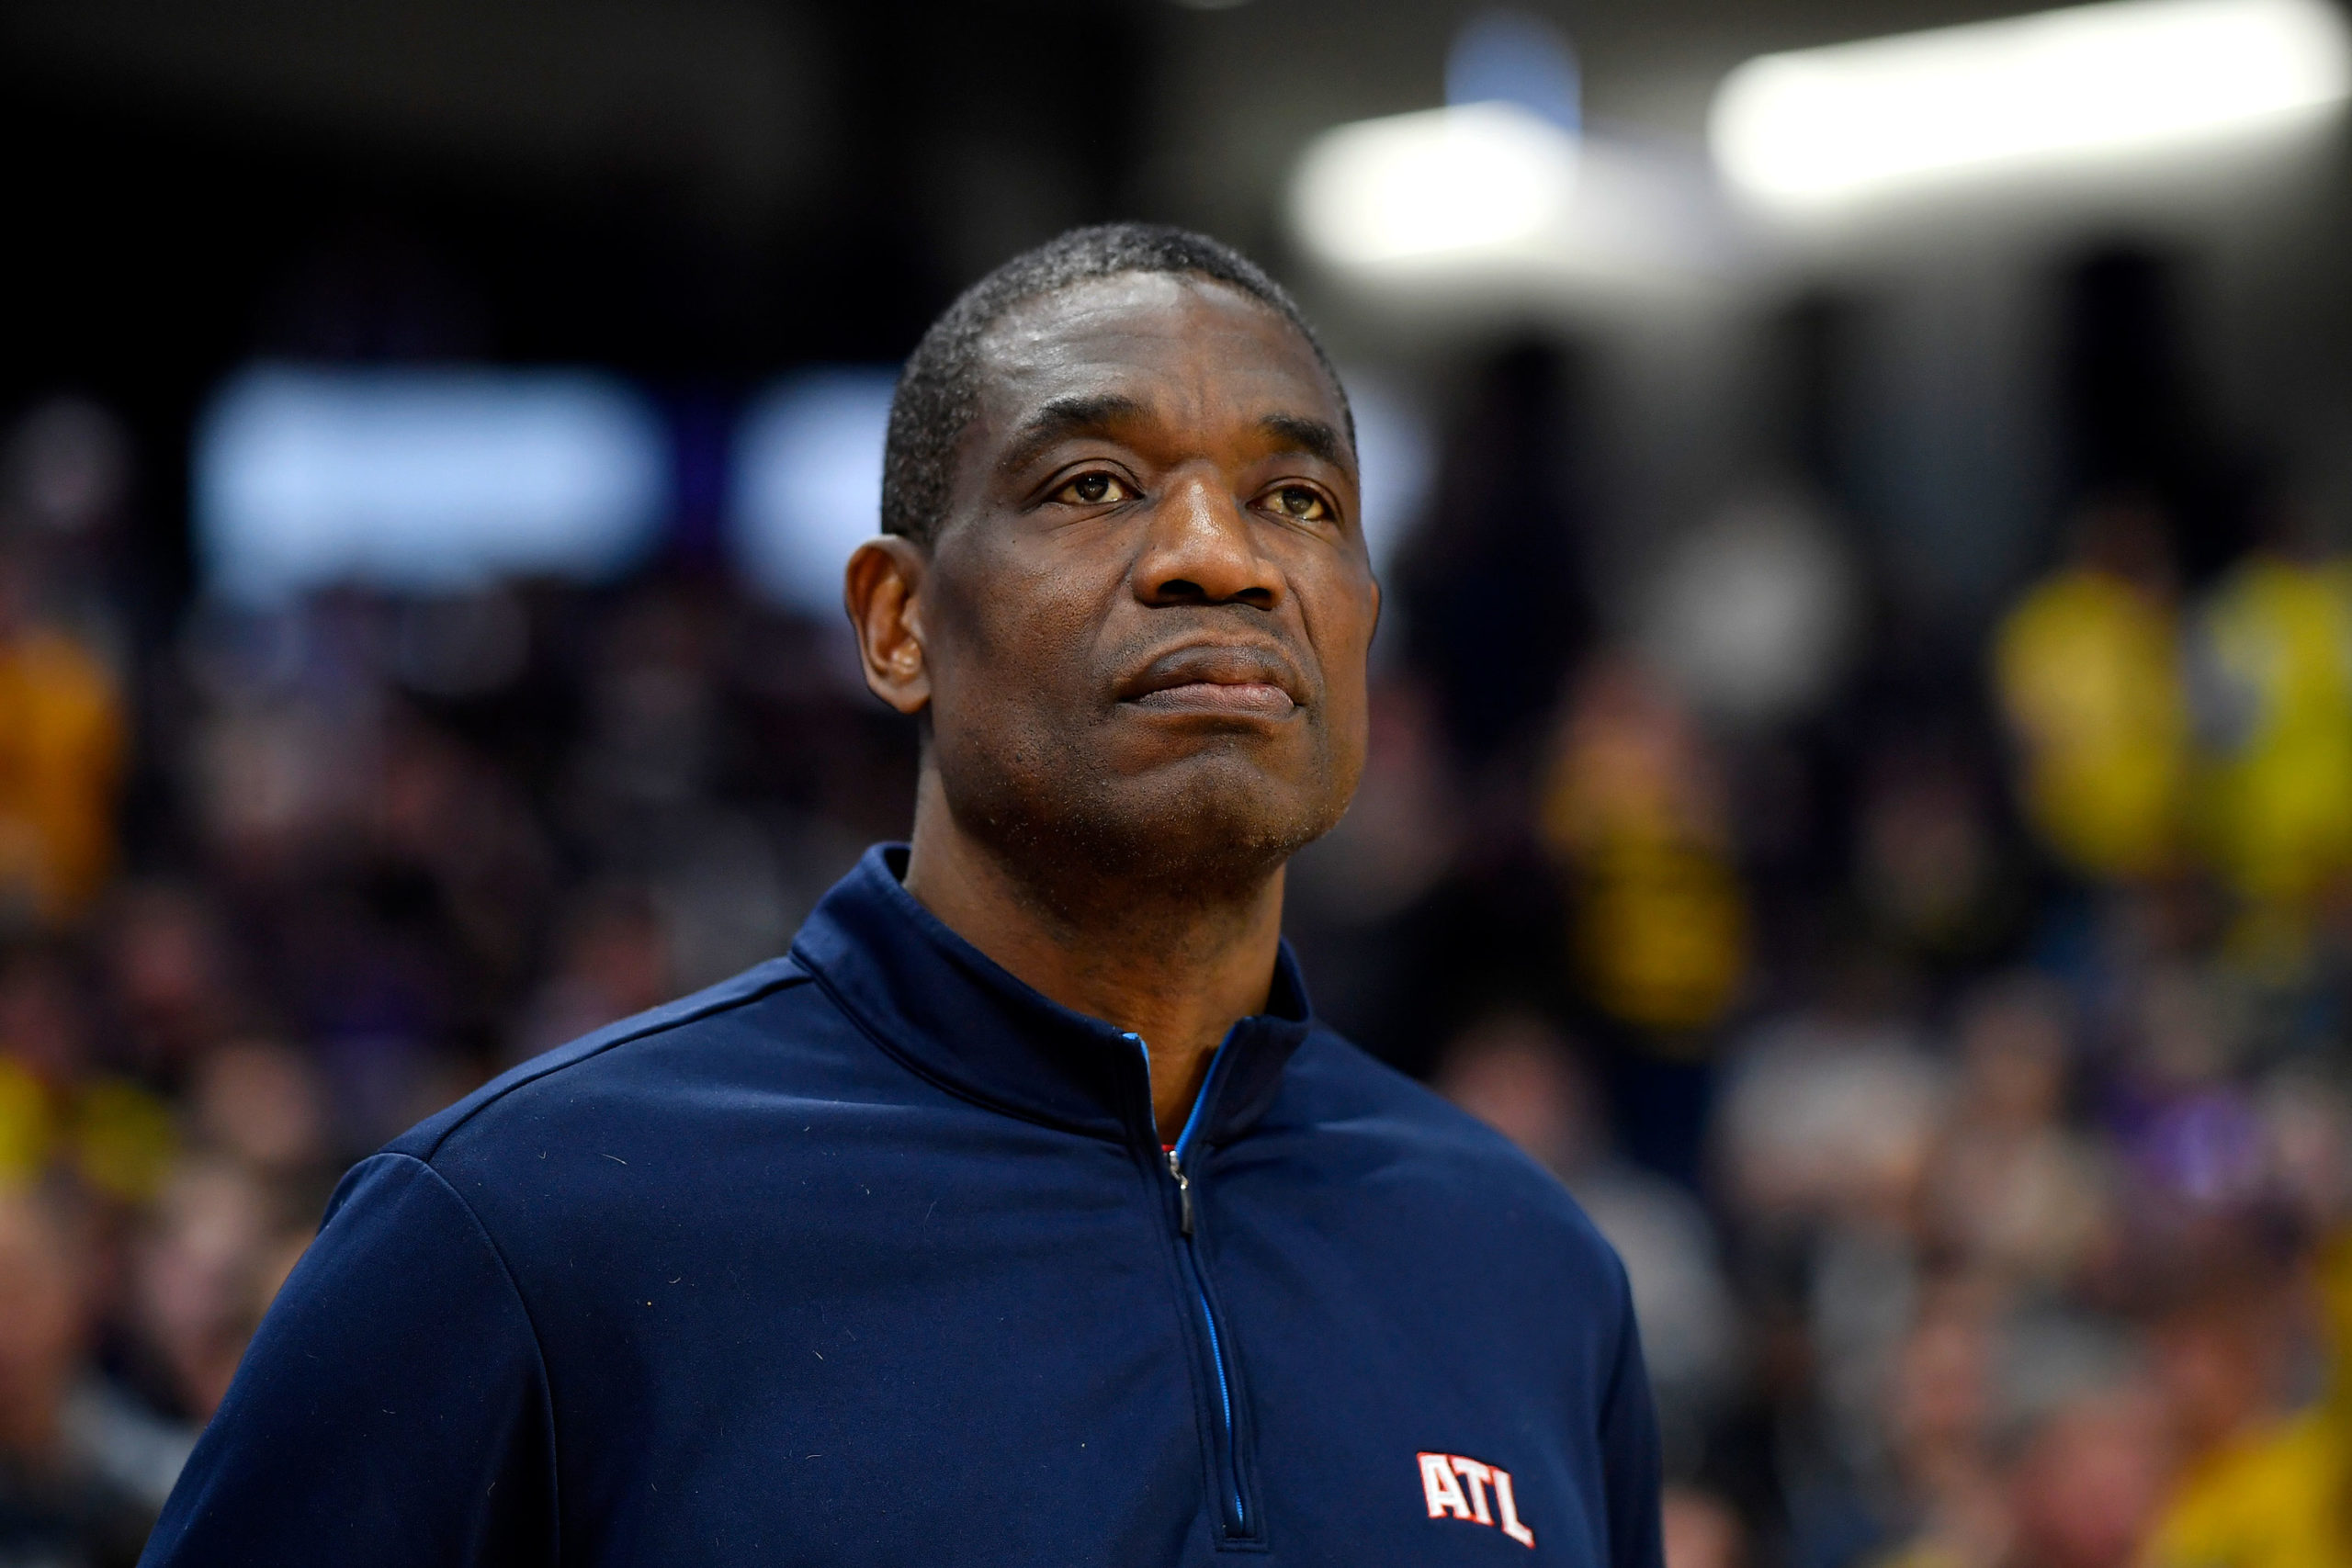 NBA legend and basketball Hall of Famer Dikembe Mutombo is receiving treatment for a brain tumor in...